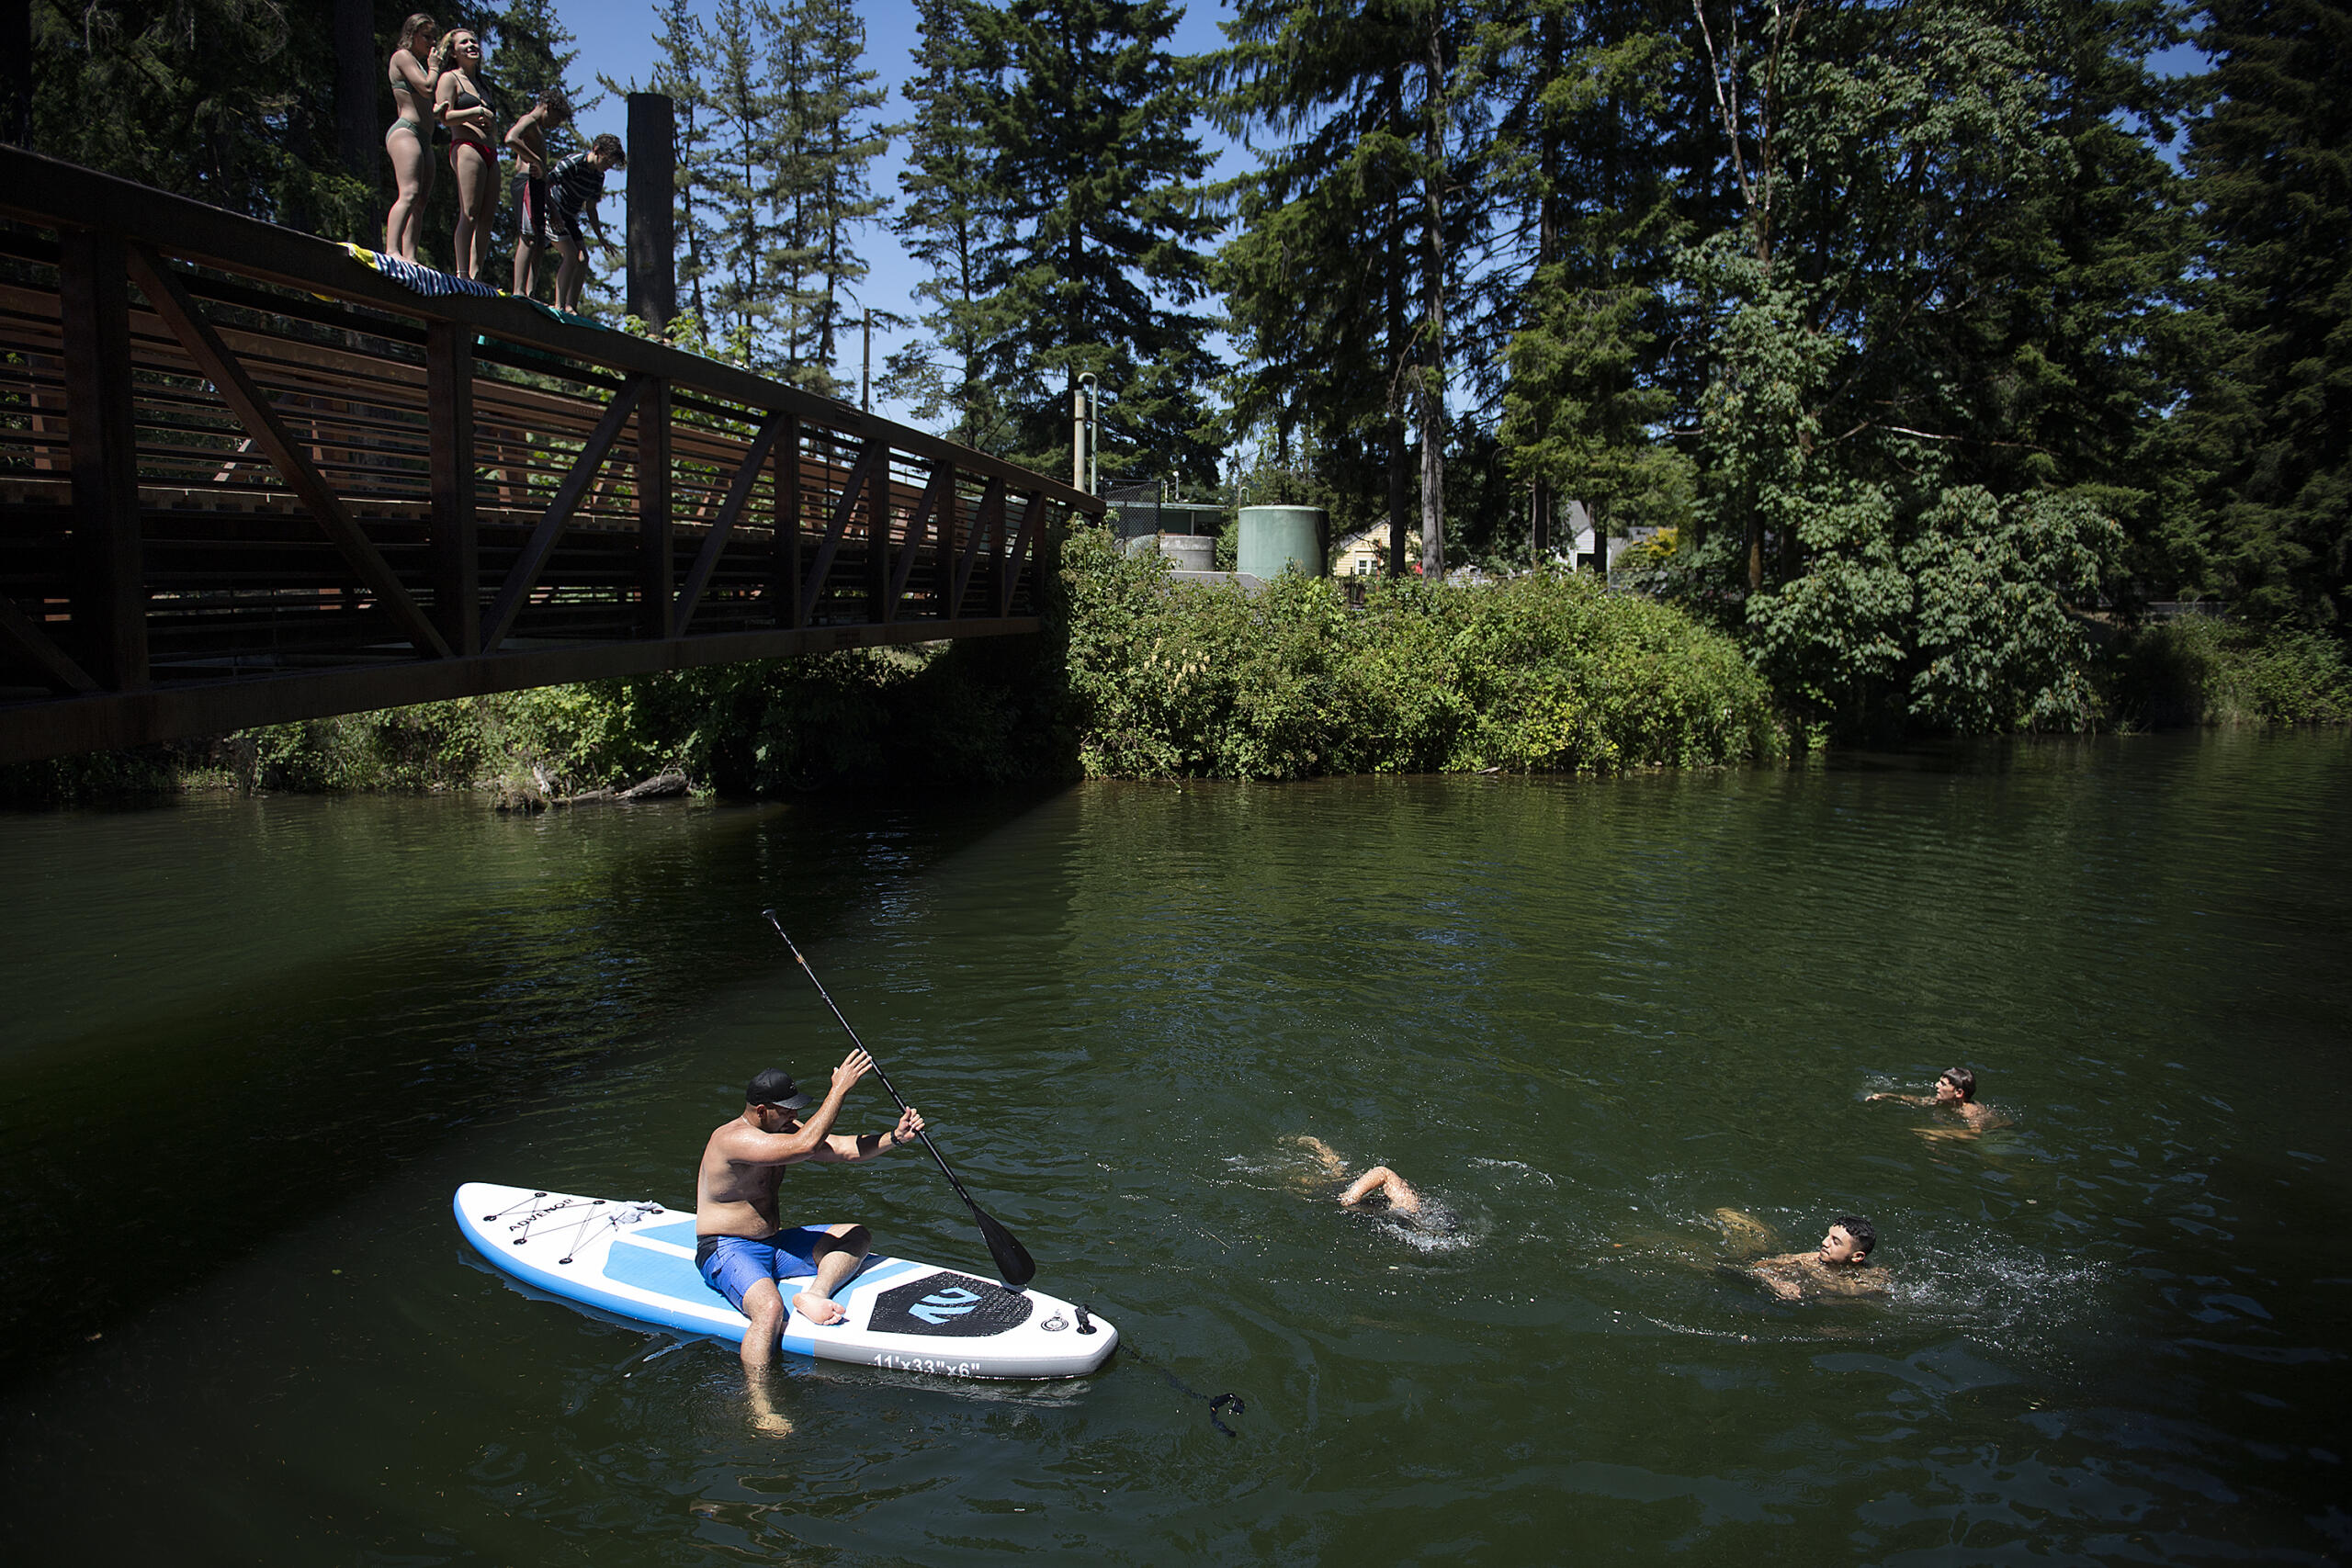 Swimmers join a stand-up paddleboarder as they gather to beat the extreme heat at Lacamas Park on Monday afternoon, June 28, 2021.